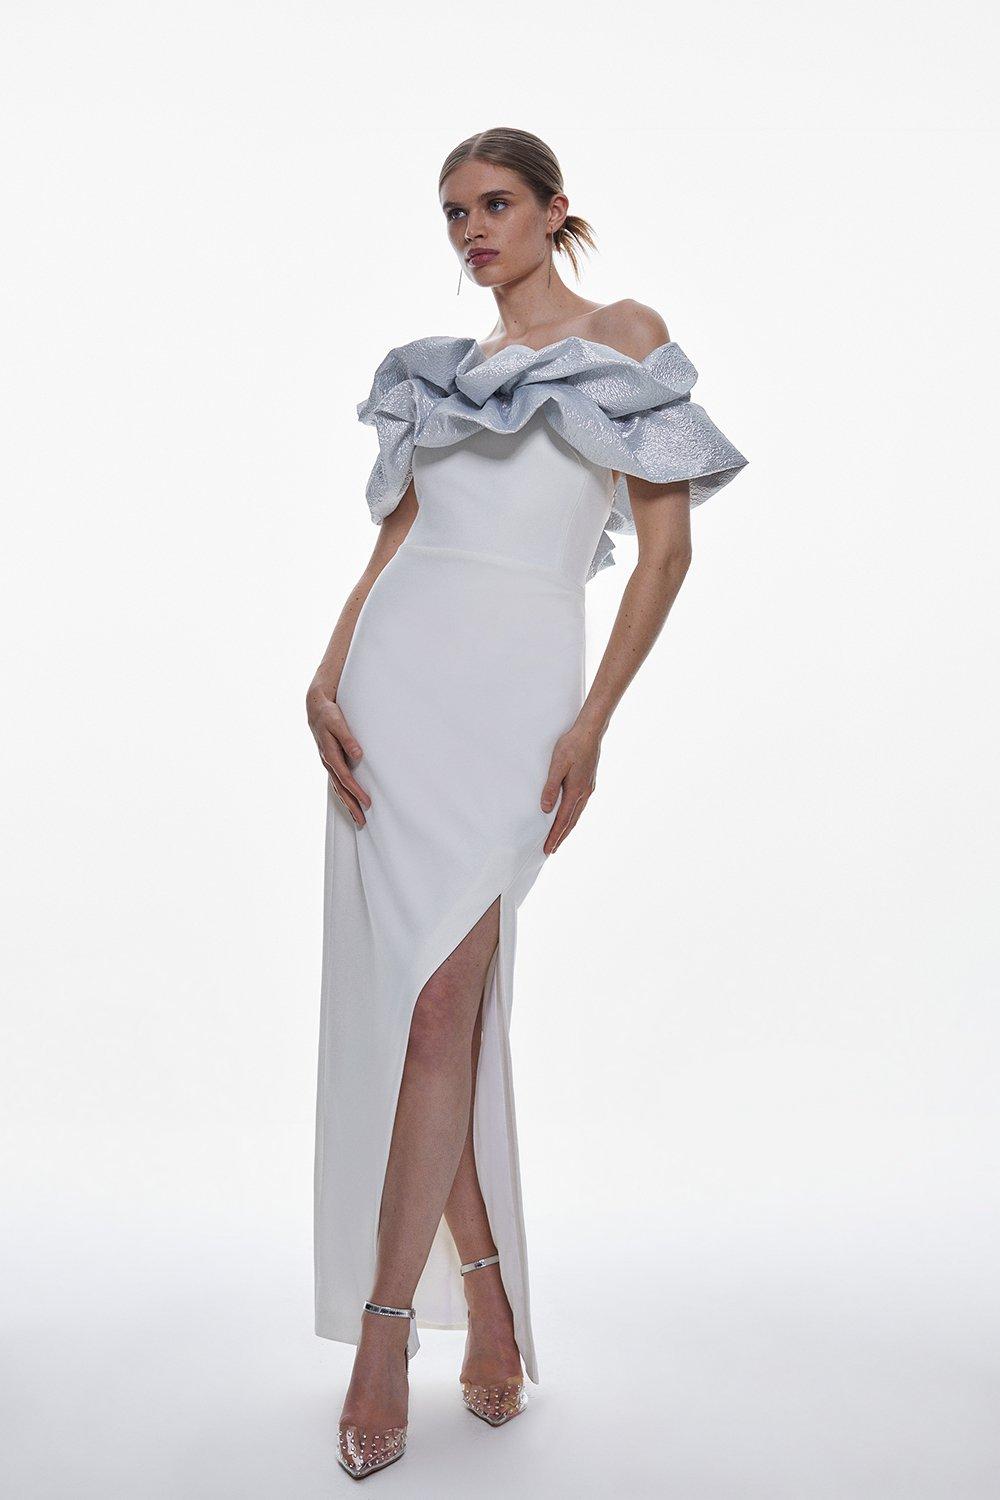 Recycled satin jacquard dress with ruffle details and long sleeves